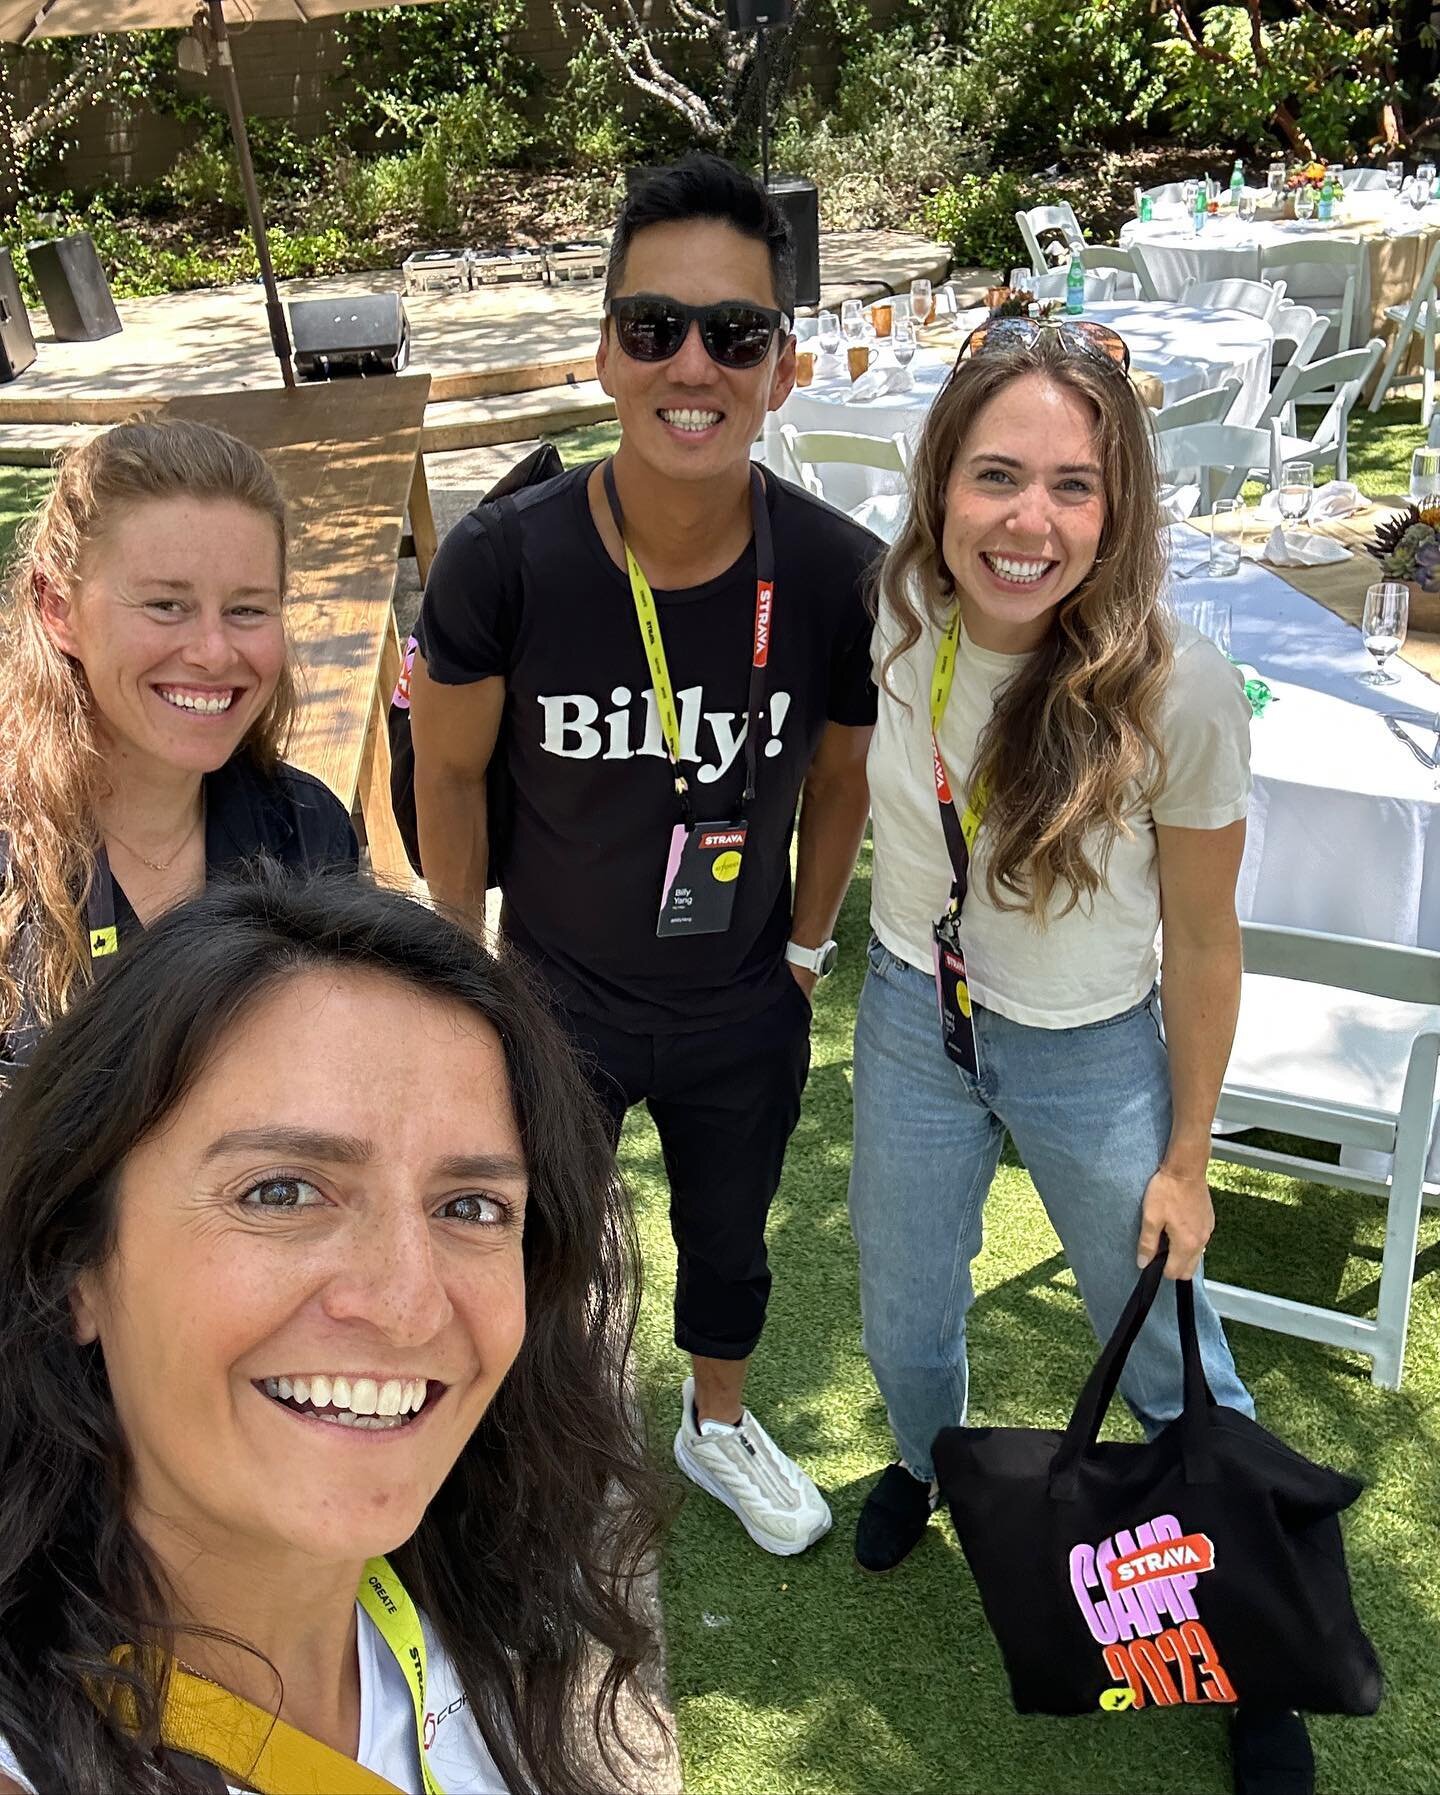 Photo dump from camp @strava! Community and commuting in LA 😳 It was such a pleasure to share the day connecting, sharing, dreaming big and finding ways to be better!

The theme of the day was community, and to be honest, I&rsquo;ve been needing thi